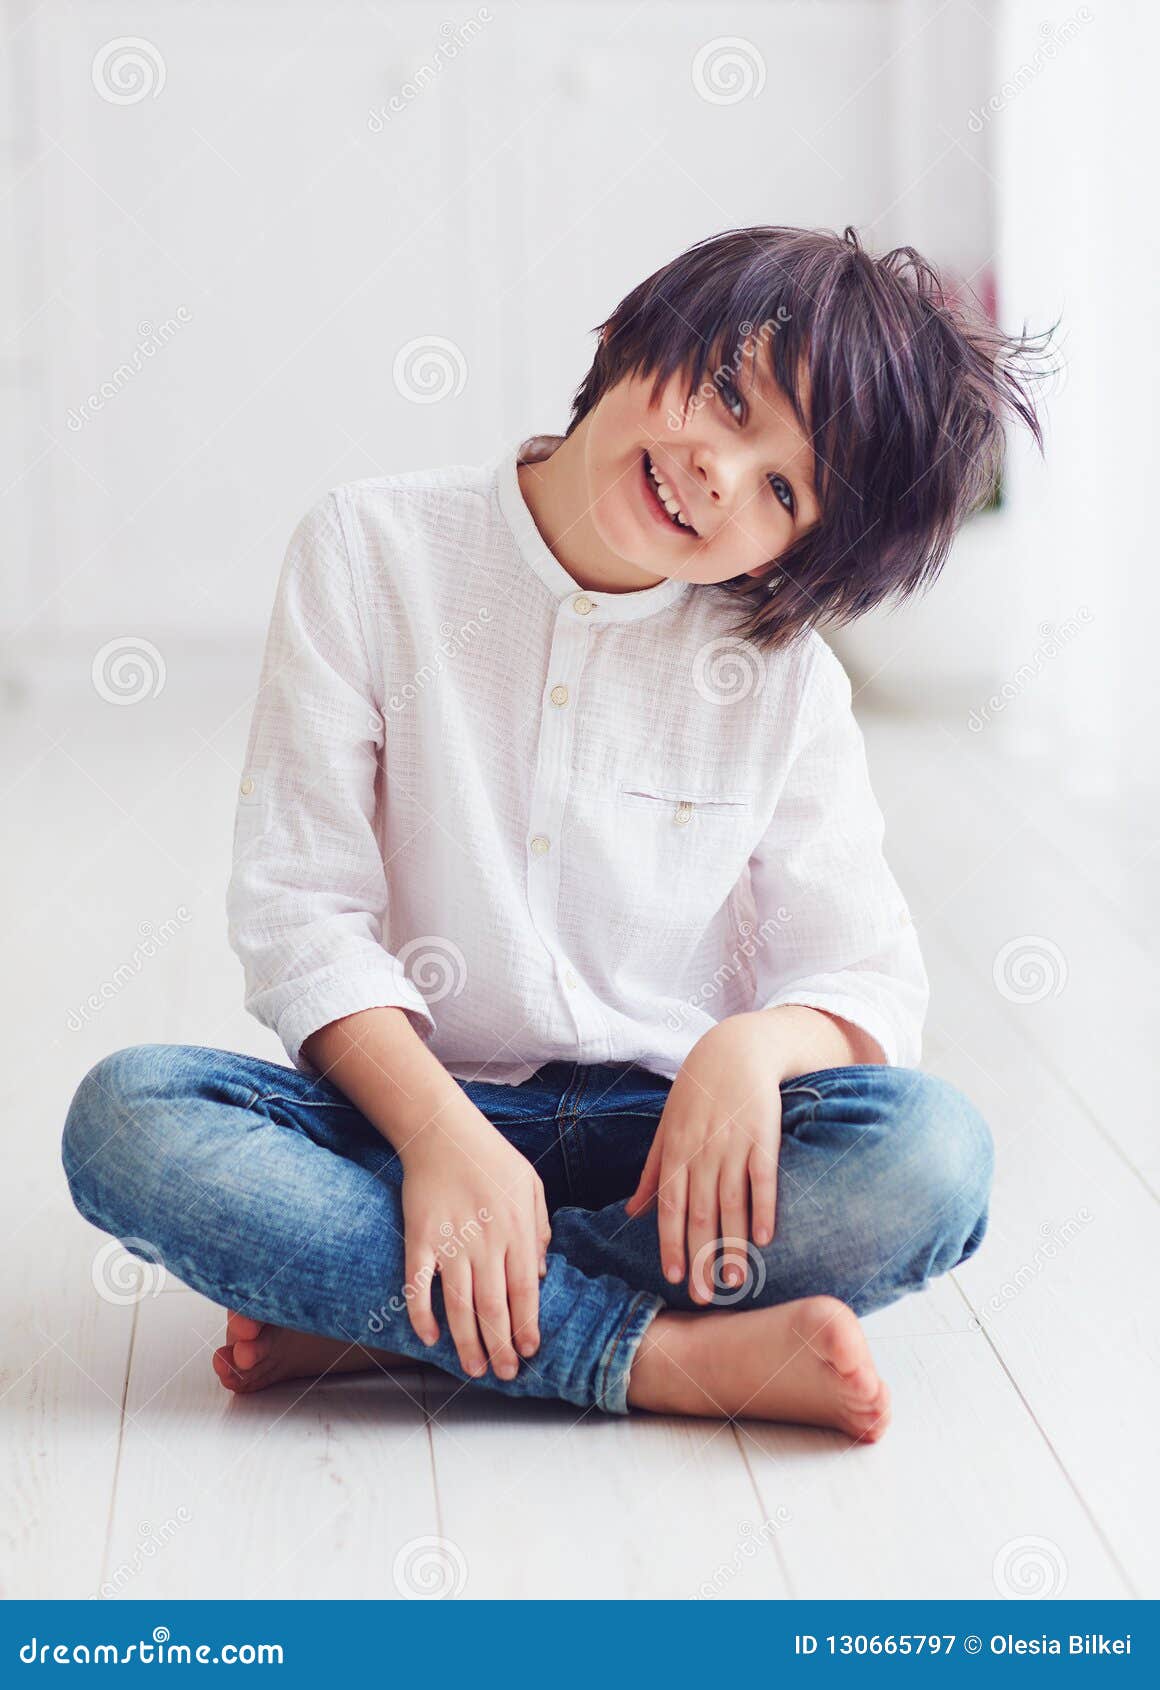 Smiling Anime Manga Young Boy Character Posing Barefoot In Bright Room